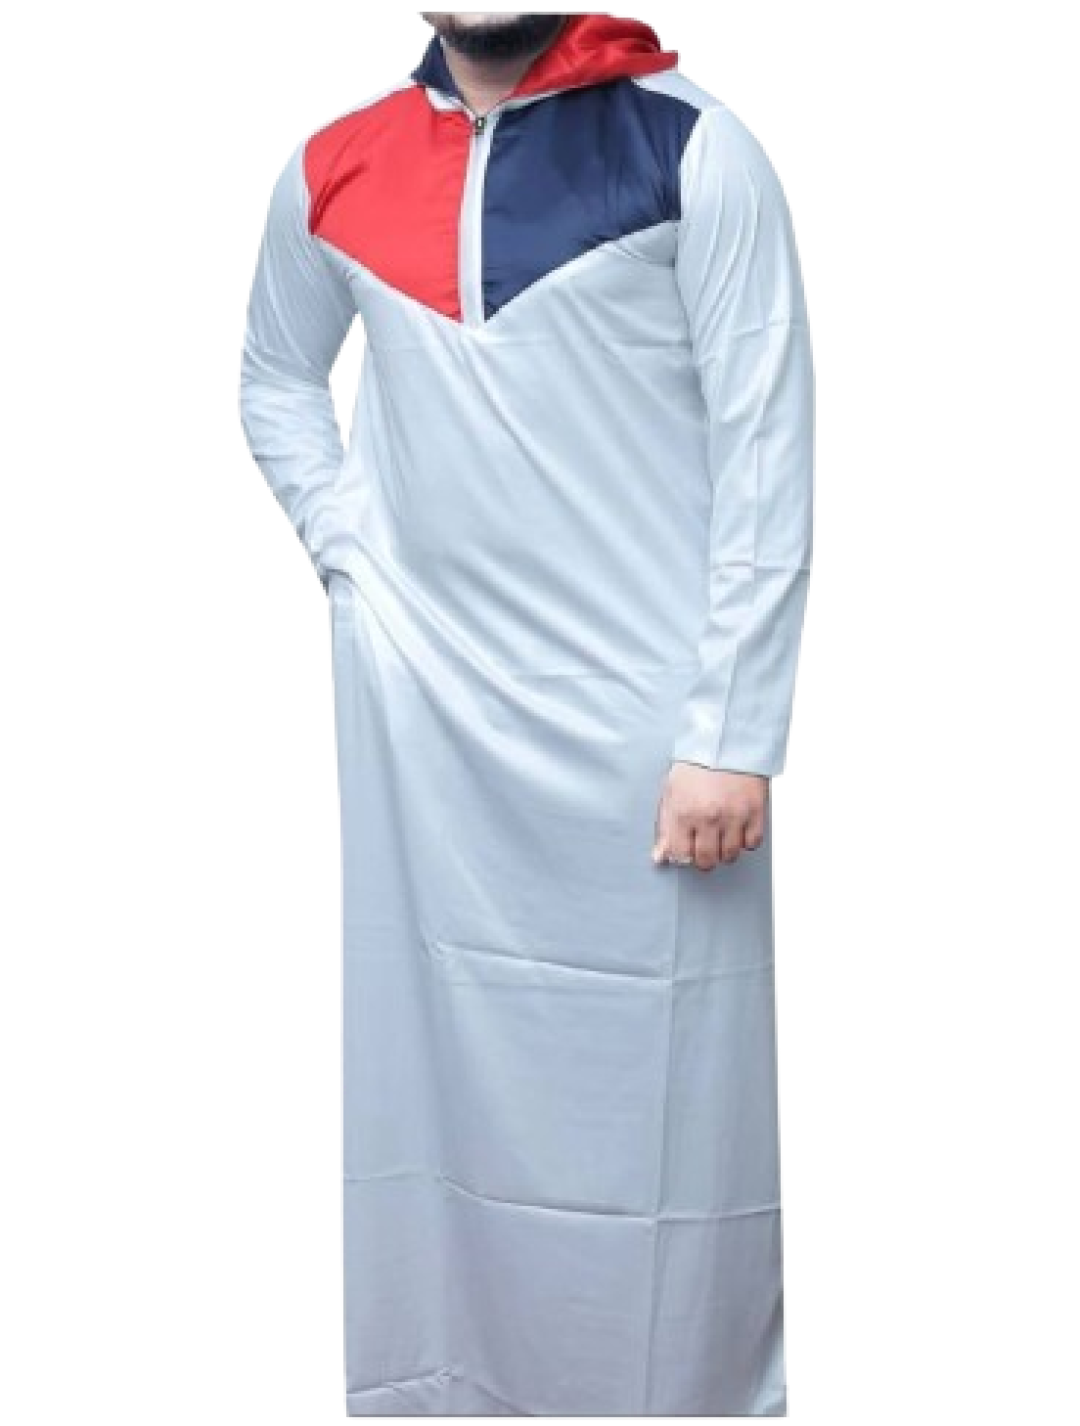 HOODED TUNIC KANZU FOR MEN,OFF-WHITE, ISLAMIC OR MUSLIM CLOTHING COLLECTIONS, PRAYER ROBES, CHEST AND WRIST COLOUR PATTERNS,VARIED SIZES,LONG SLEEVED, NO CHEST POCKETS, ZIP LINE CHEST, MODESTY, SIMPLE AND CLASSY, FROM TURKEY